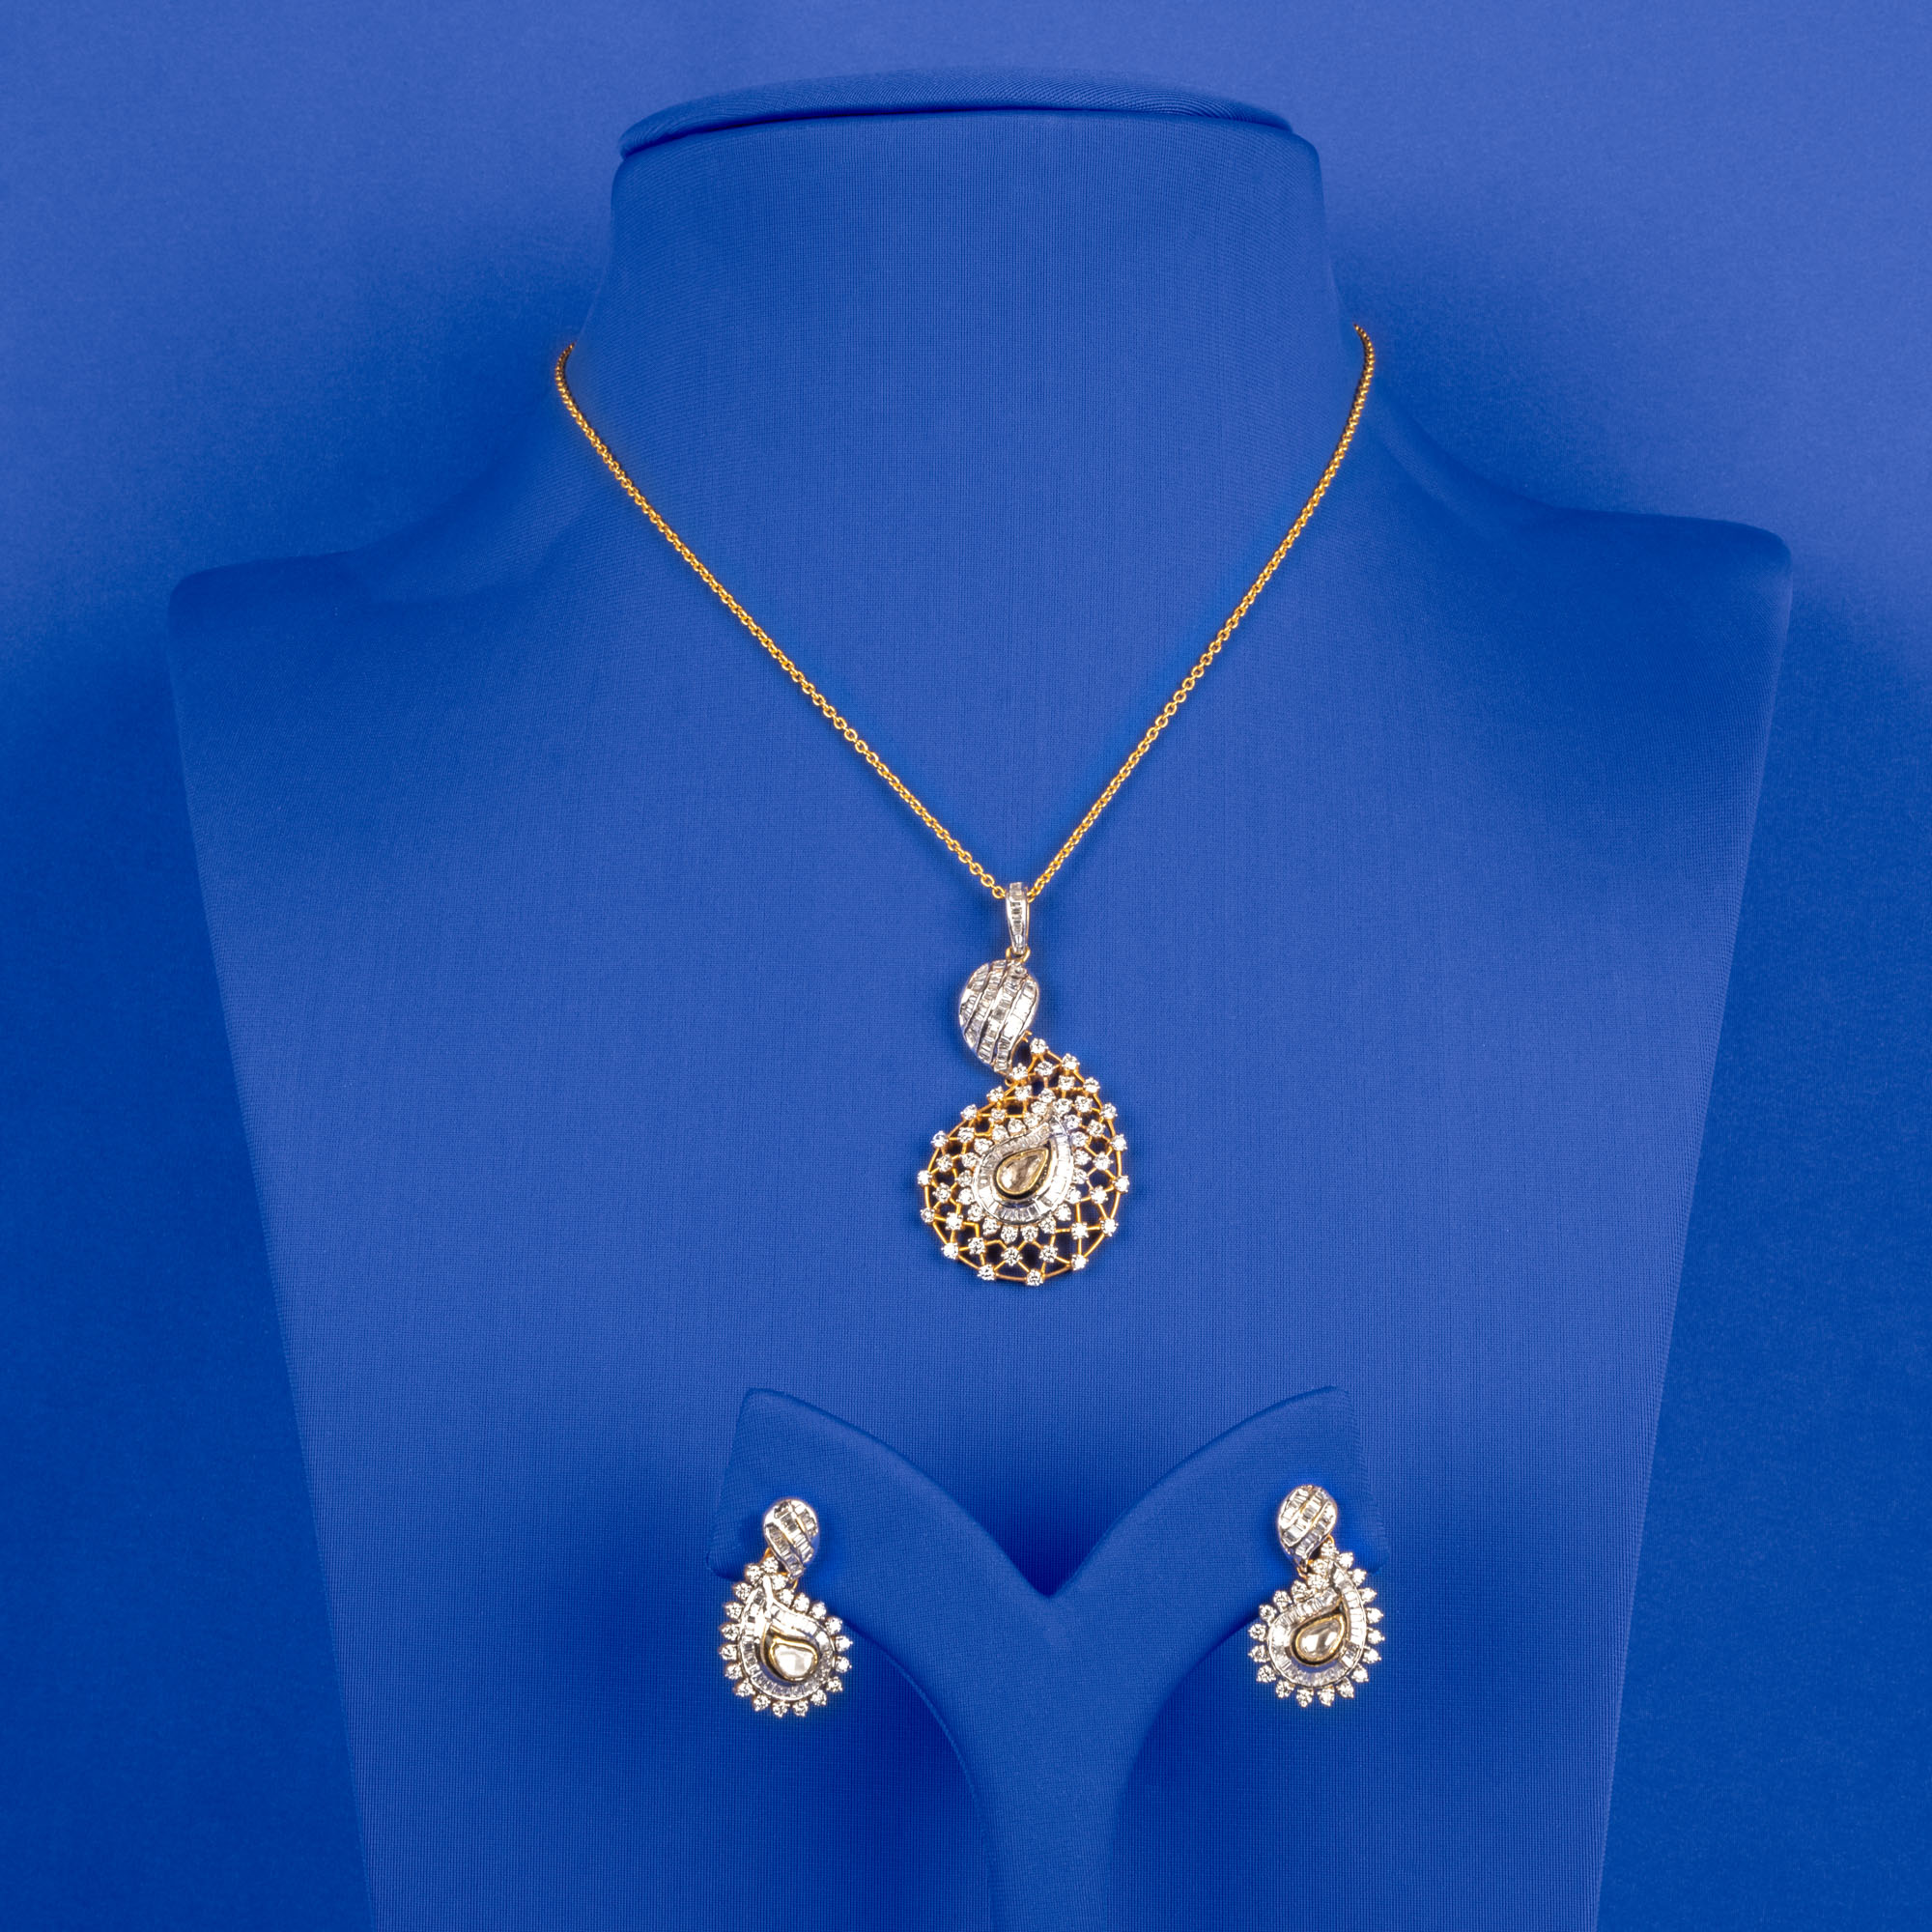 Golden Glow: Handcrafted 18K Yellow Gold Diamond Pendant & Earrings Set (chain not included)